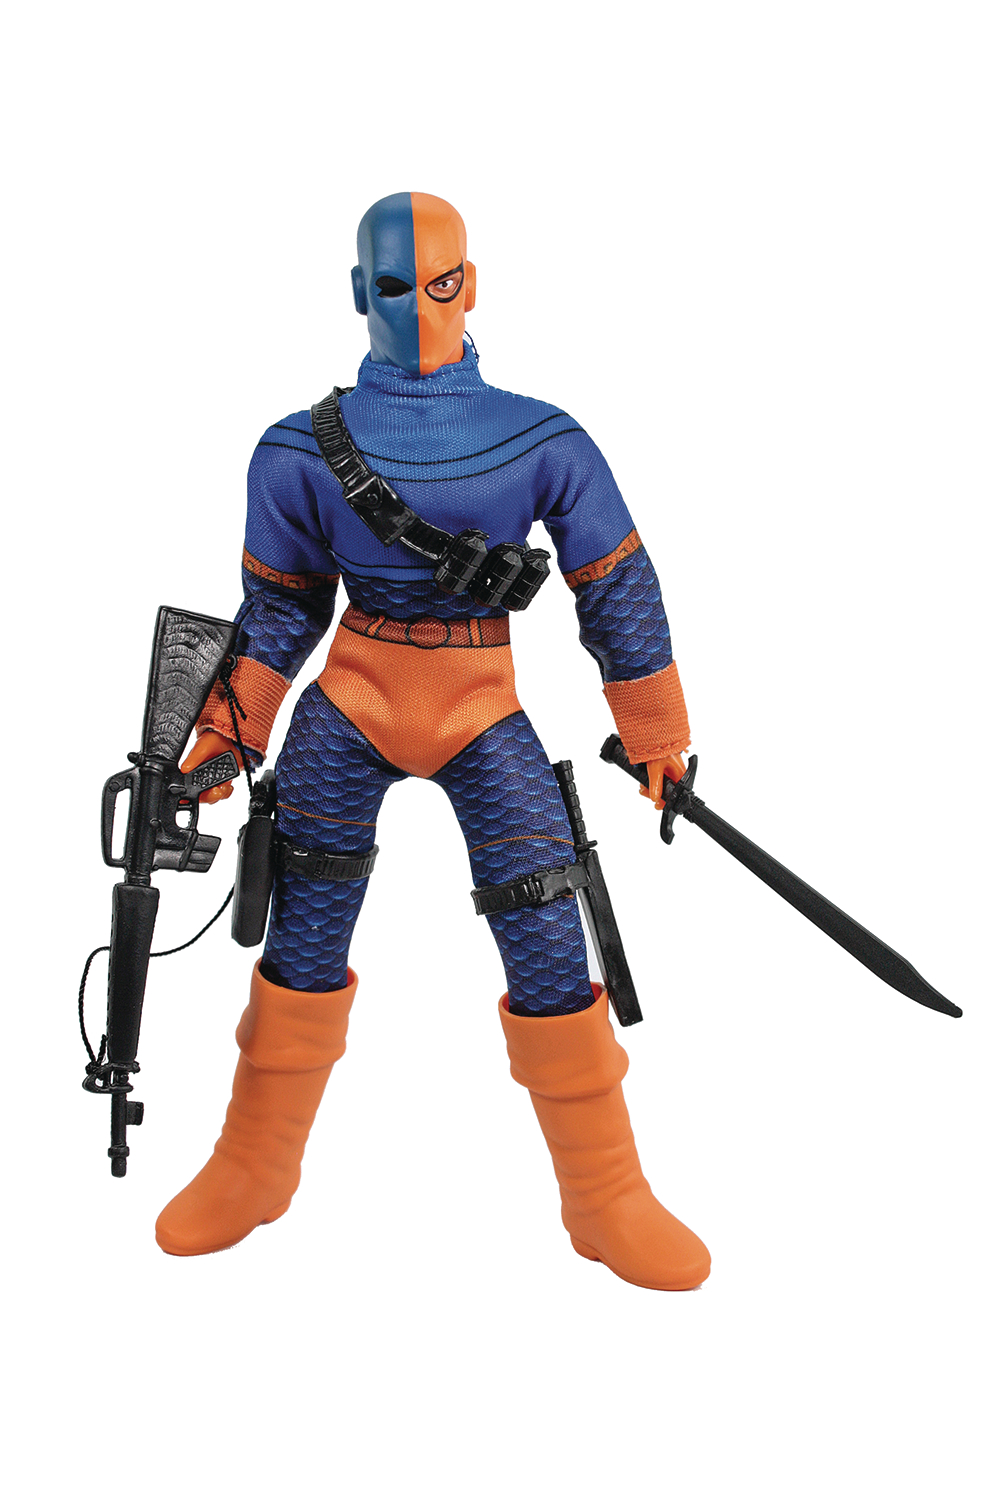 Mego DC Heroes Deathstroke Px 8 Inch Action Figure